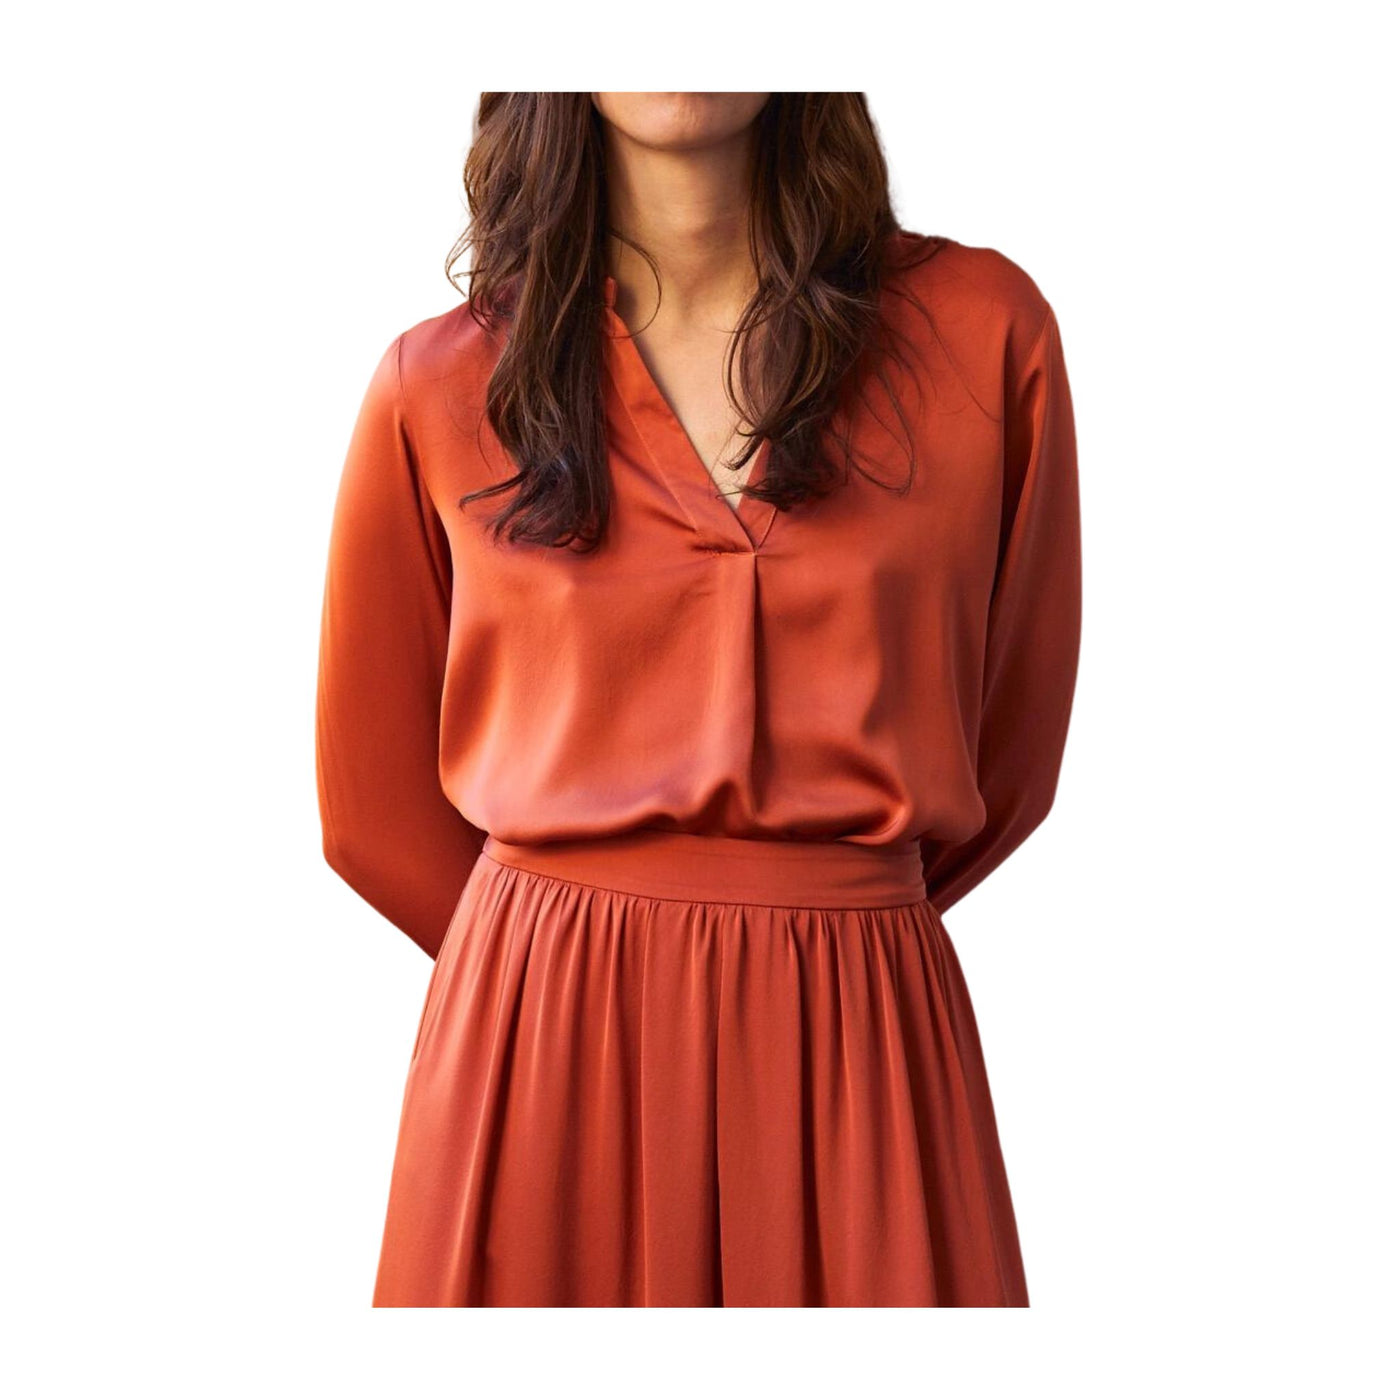 Women's blouse in solid color silk